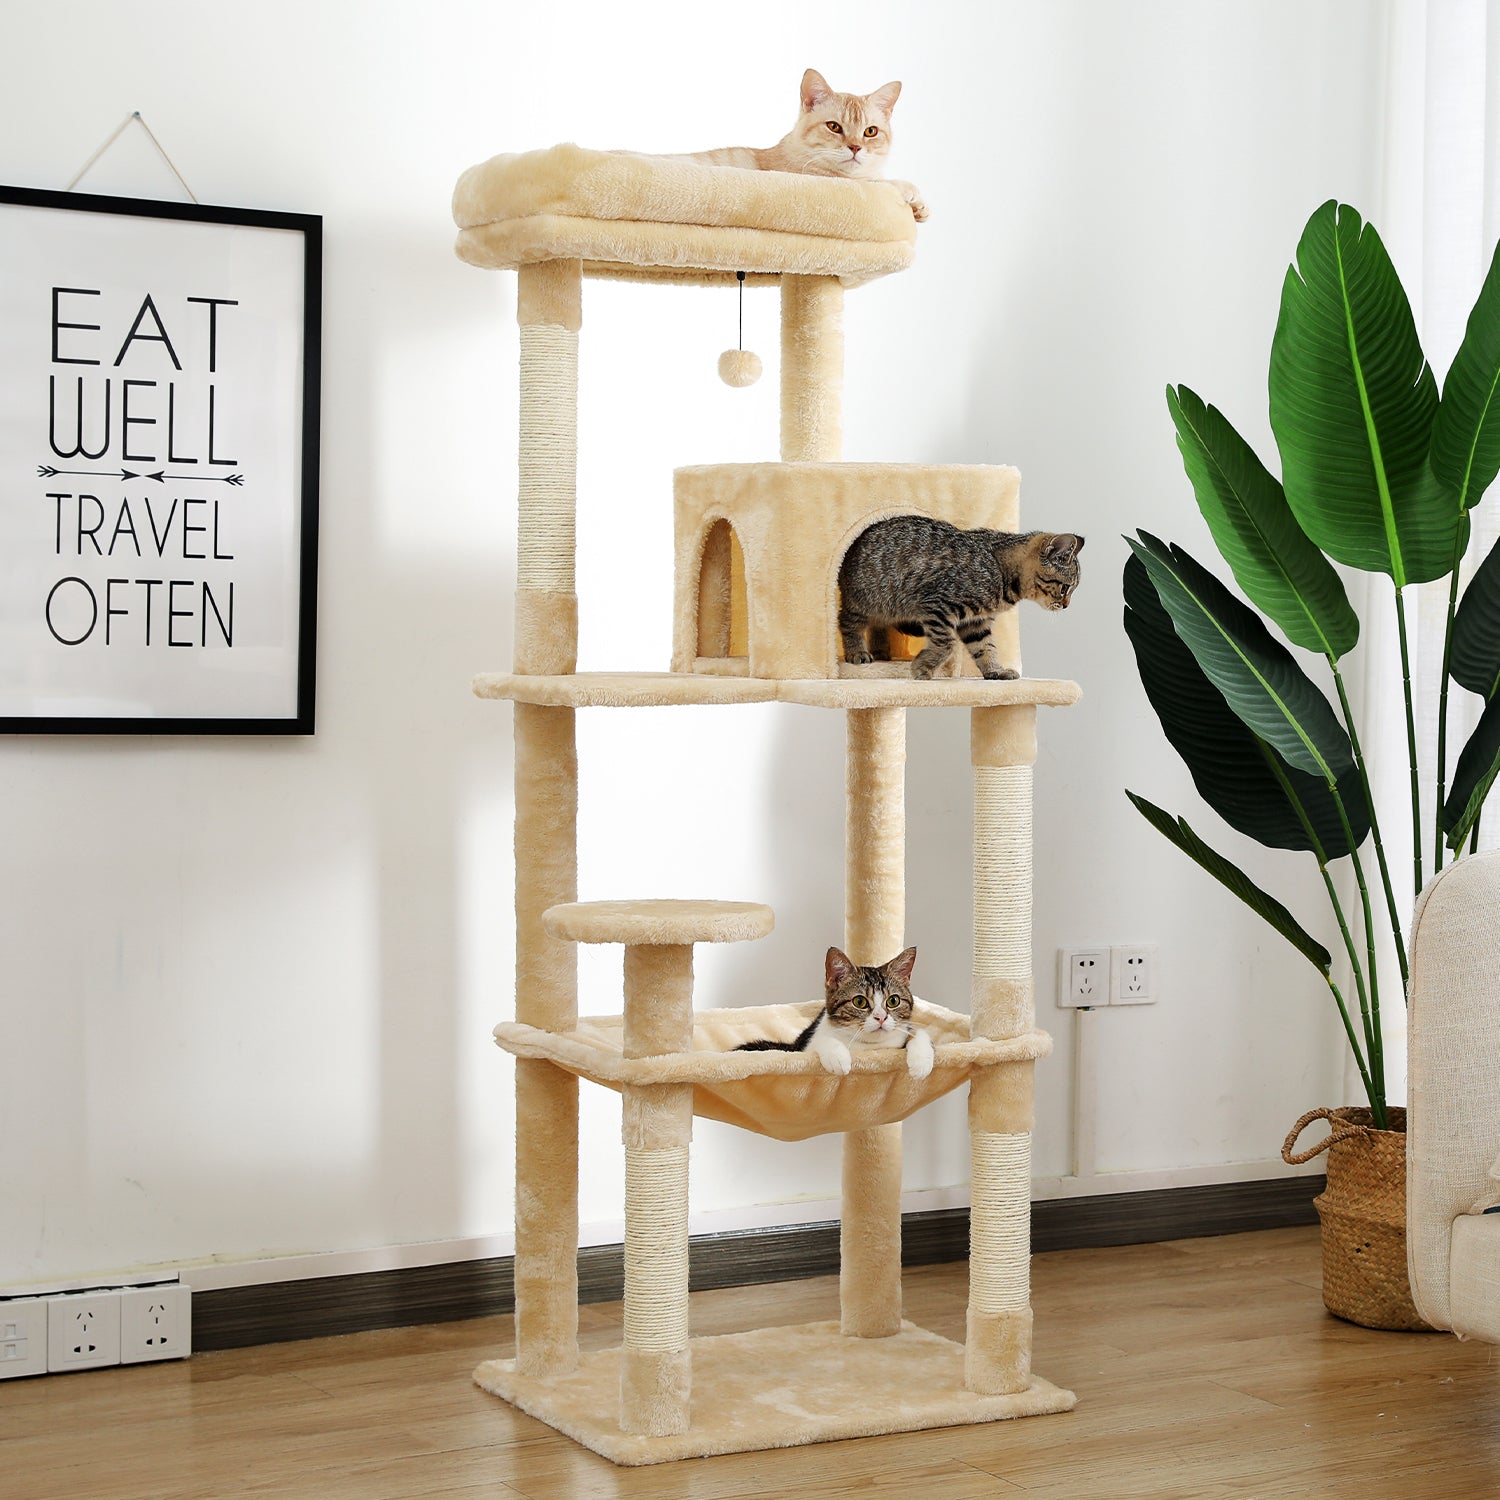 Luxury Cat Tree Cat Tower with Sisal Scratching Post, Cozy Condo, Top Perch, Hammock and Dangling Ball